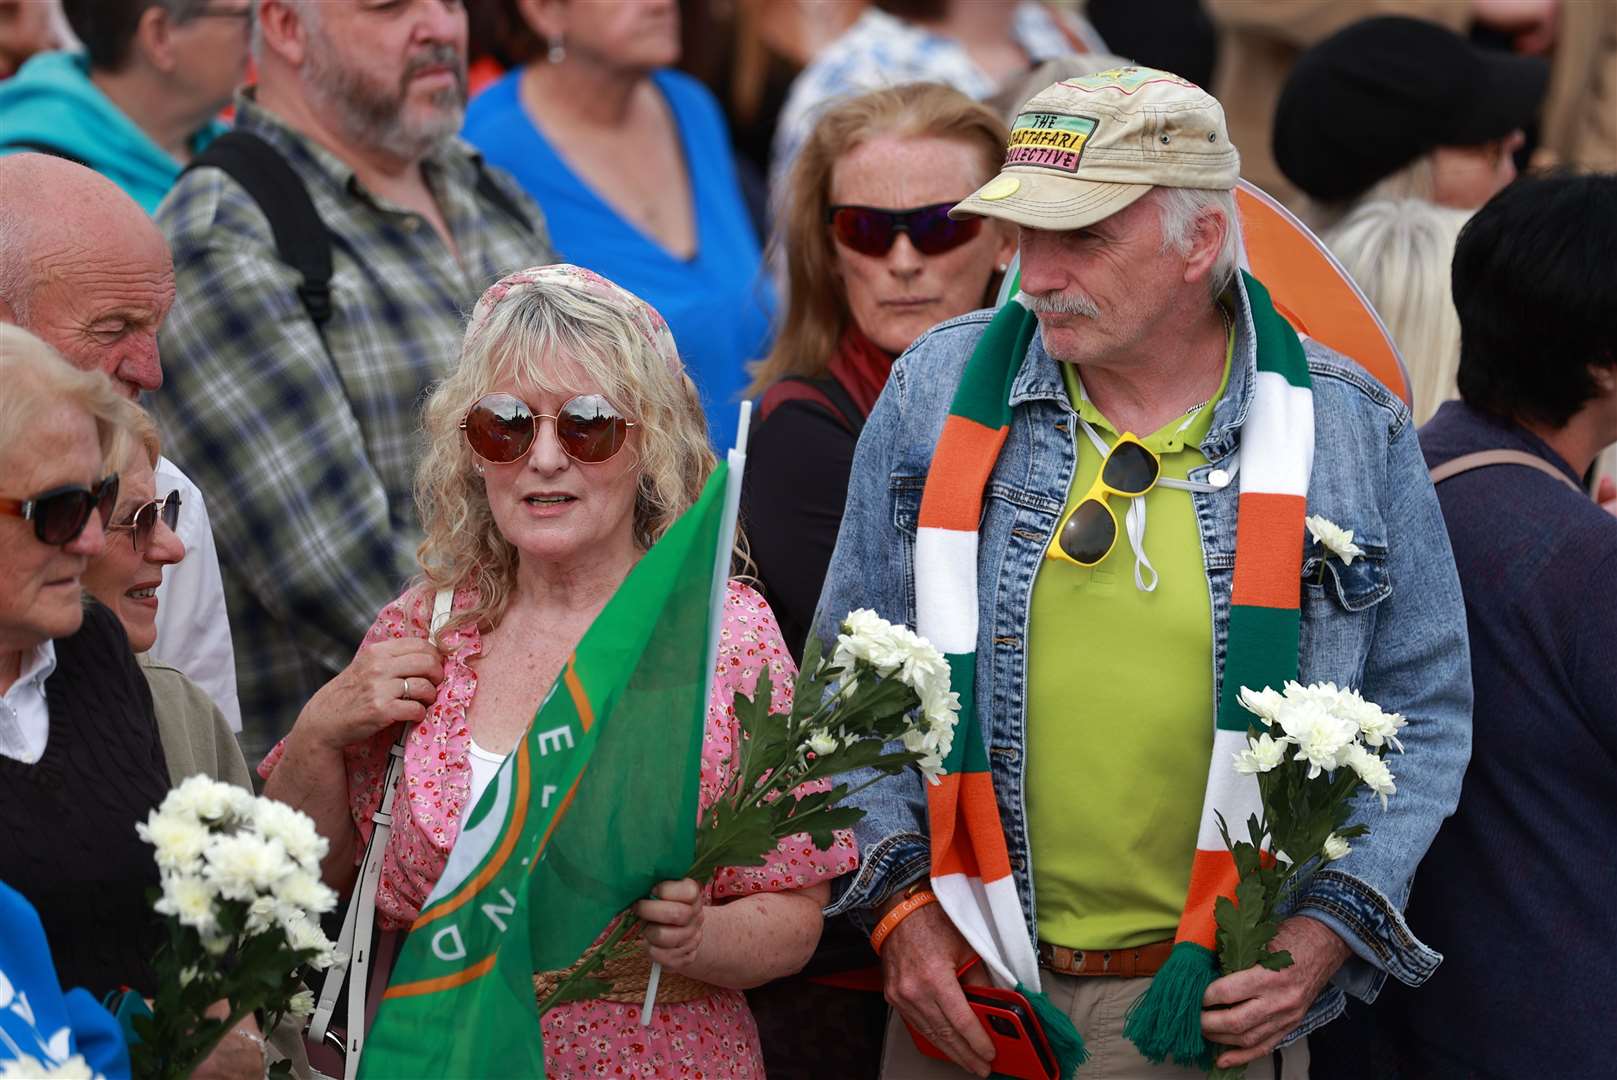 Sinead O’Connor fans Pamela Moore and Peter Gannon came to pay their respects (Liam McBurney/PA)